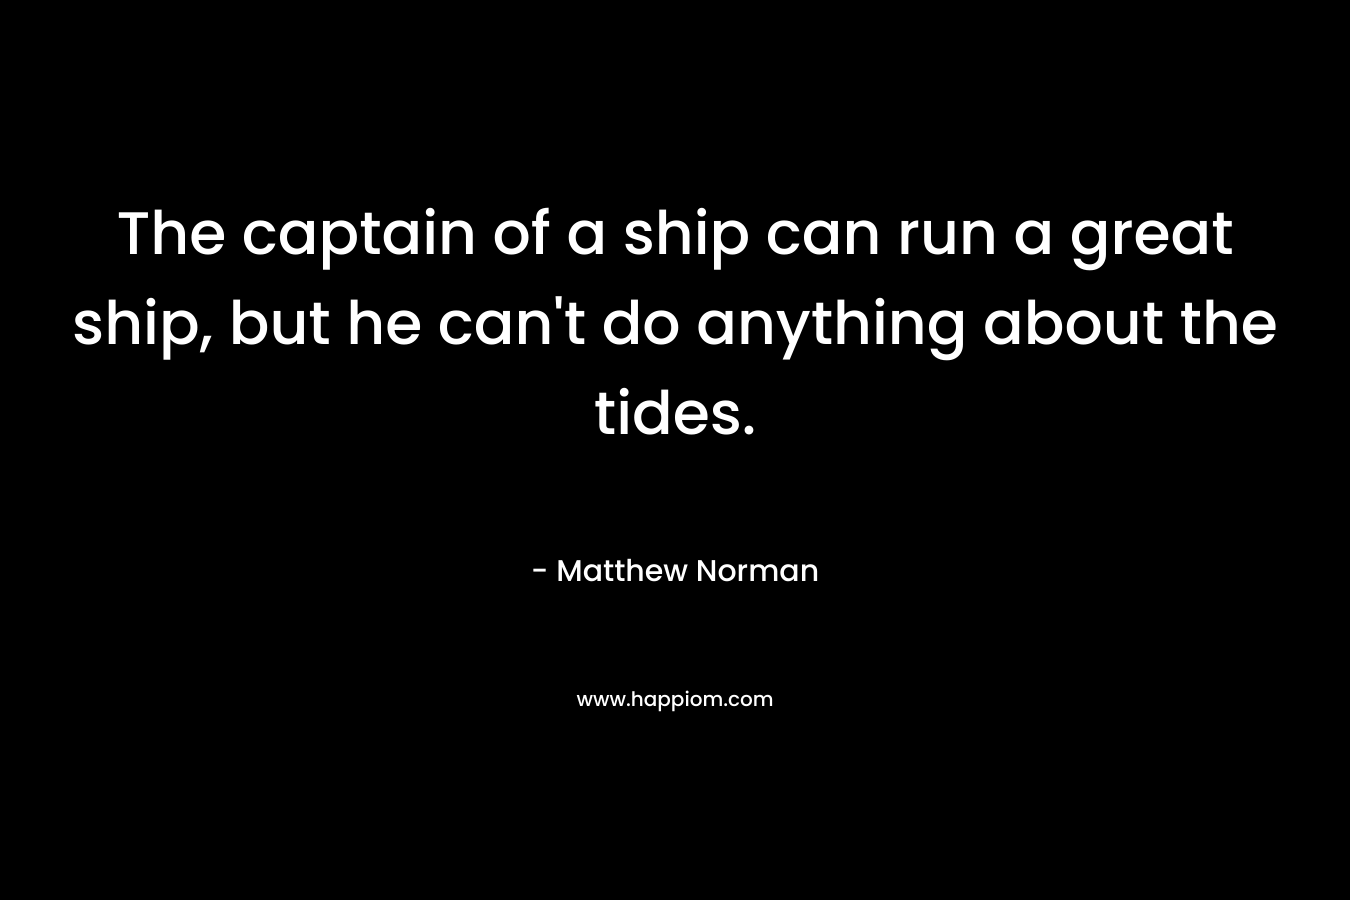 The captain of a ship can run a great ship, but he can't do anything about the tides.